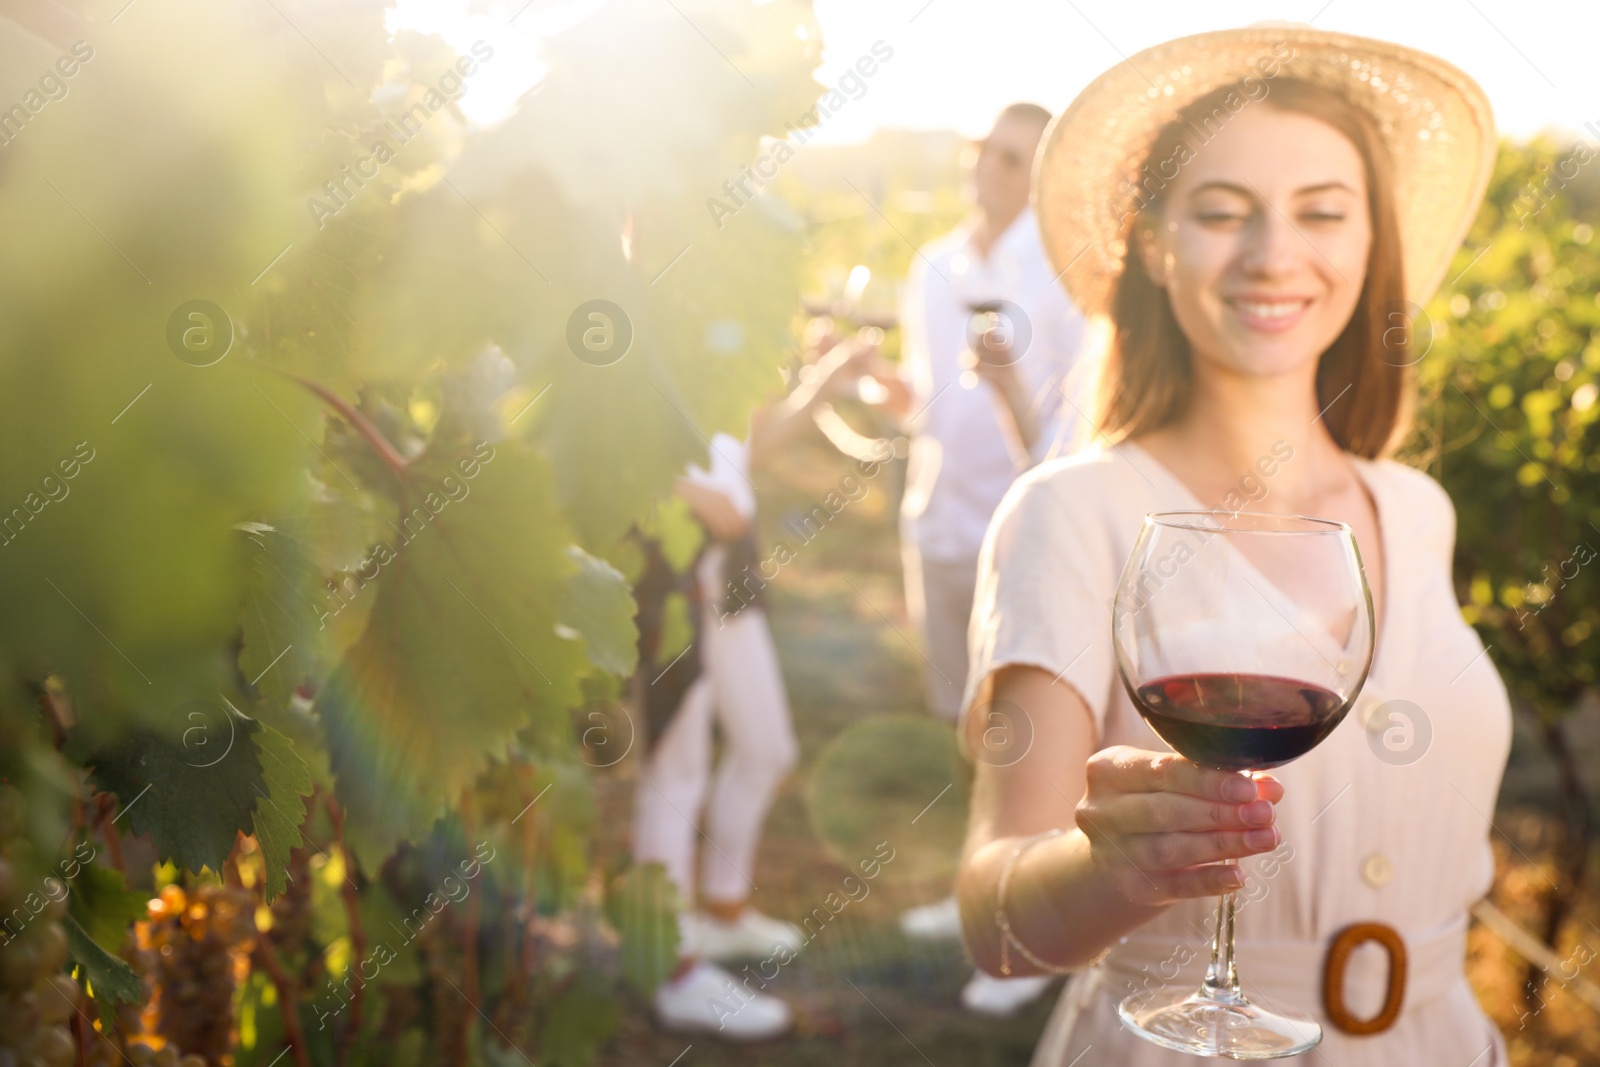 Photo of Beautiful young woman with glass of wine in vineyard, focus on hand